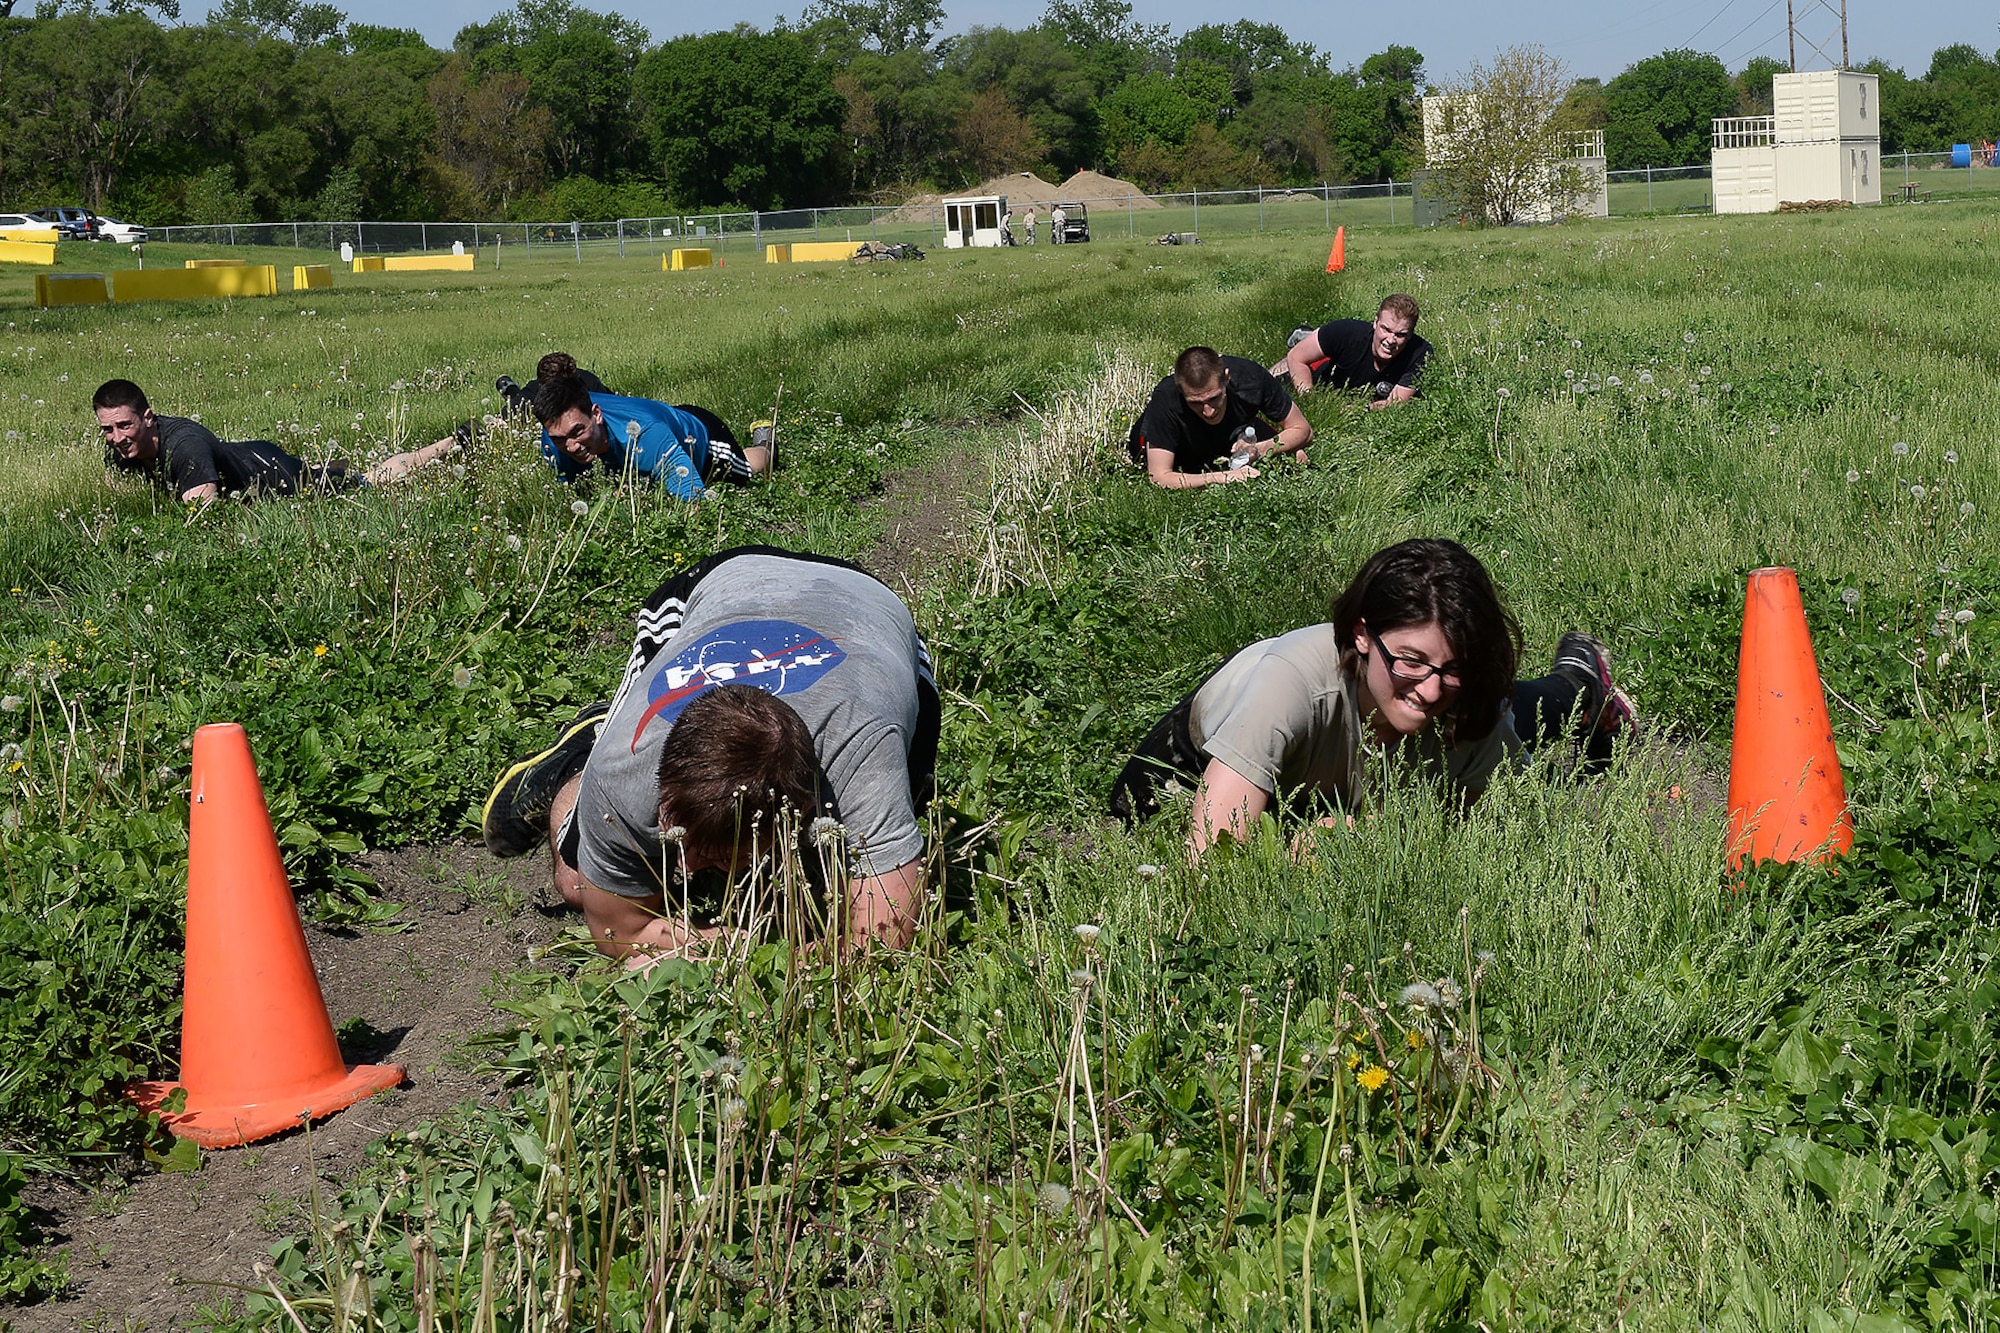 Members of the 55th Security Forces Squadron low crawl during an evasion challenge May 17, 2018, at Offutt Air Force Base, Nebraska. Offutt’s defenders participated in local events as well as coordinating base events to recognize the contributions of police across the nation. (U.S. Air Force photo by Charles J. Haymond)